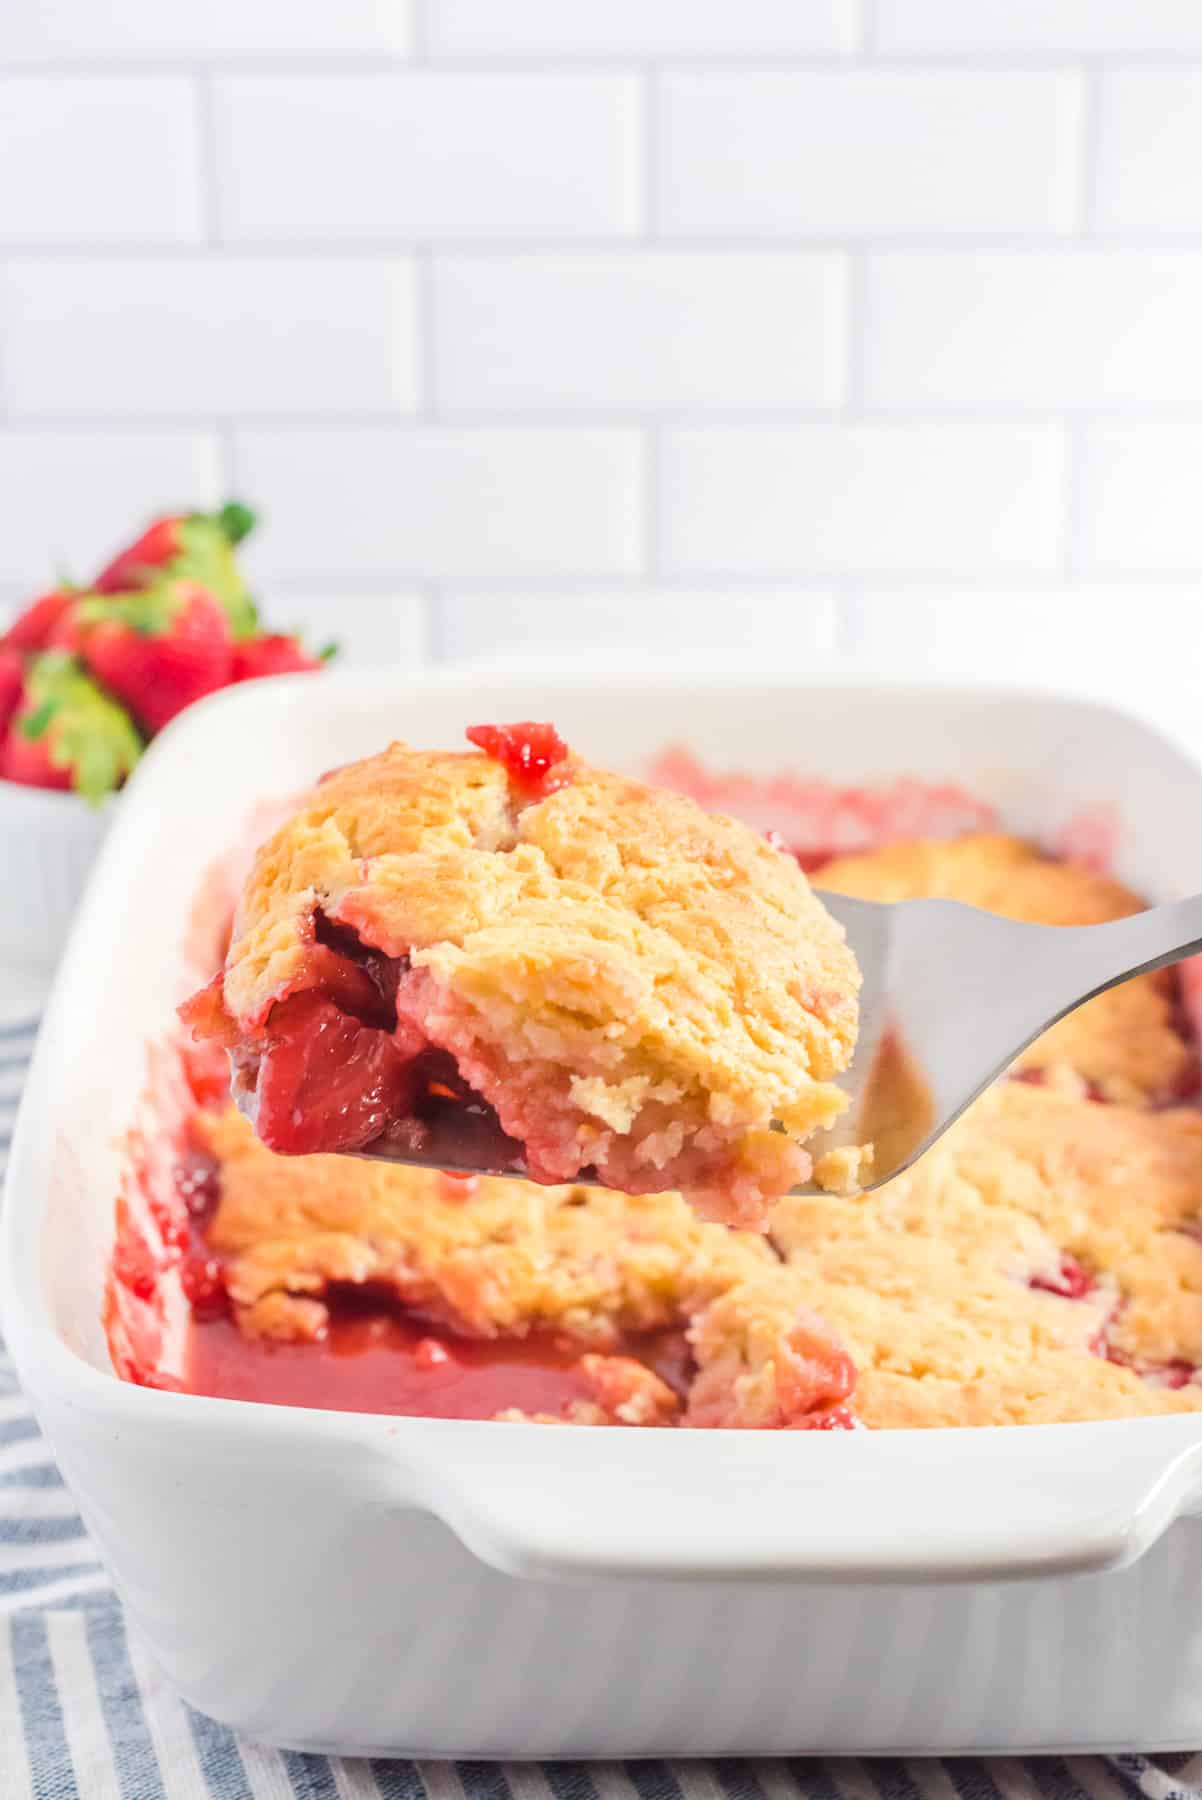 Strawberry cobbler being scooped from a pan from the side.